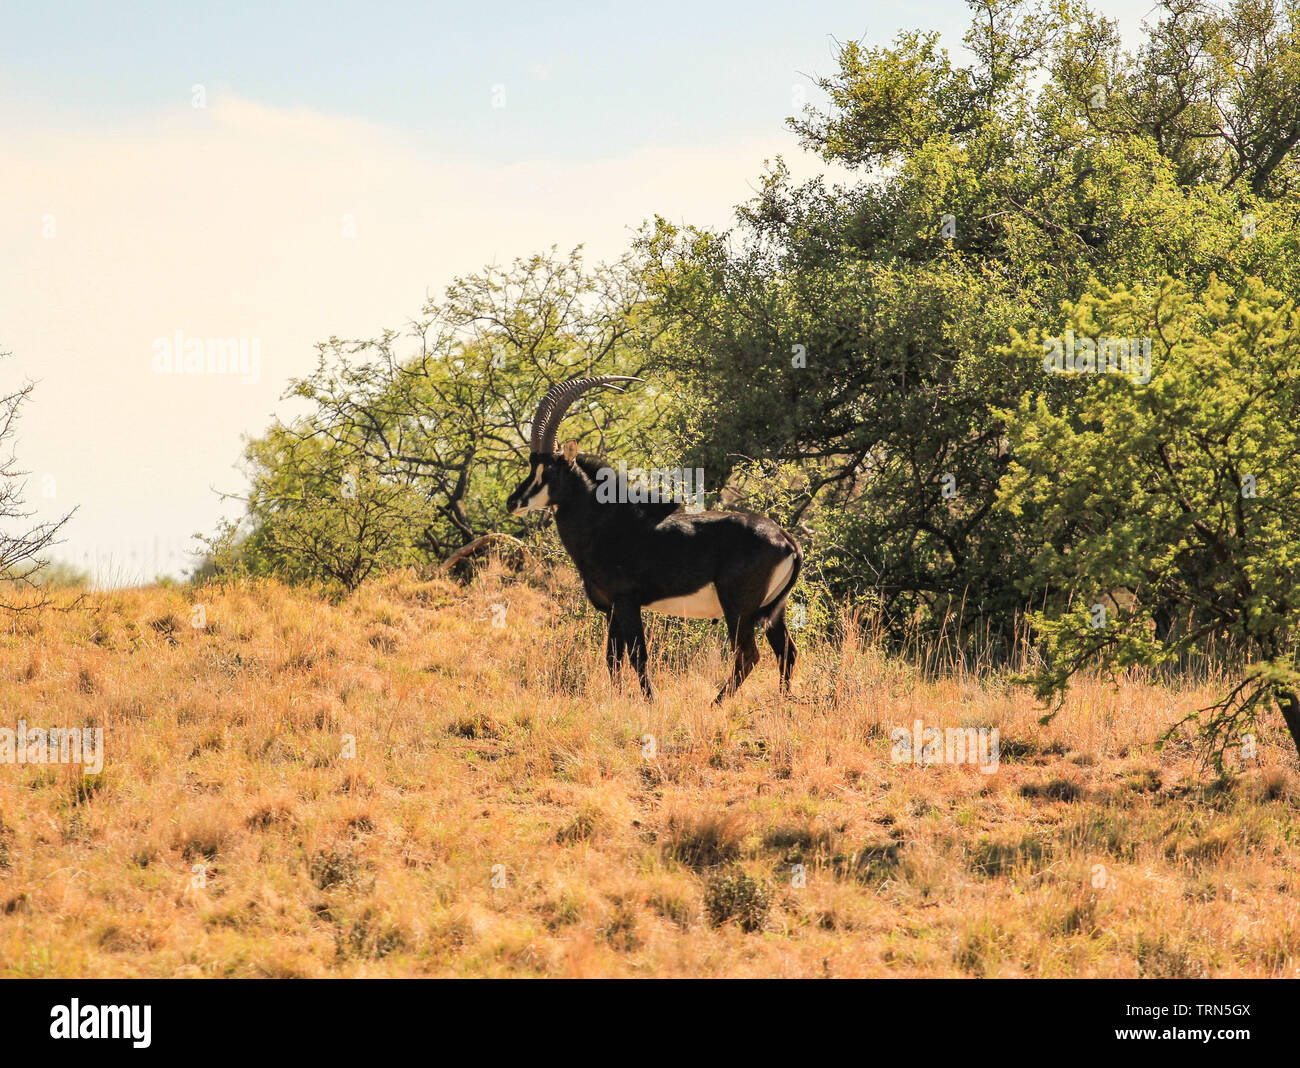 Hippotragus niger - sable antelope male in African nature Stock Photo